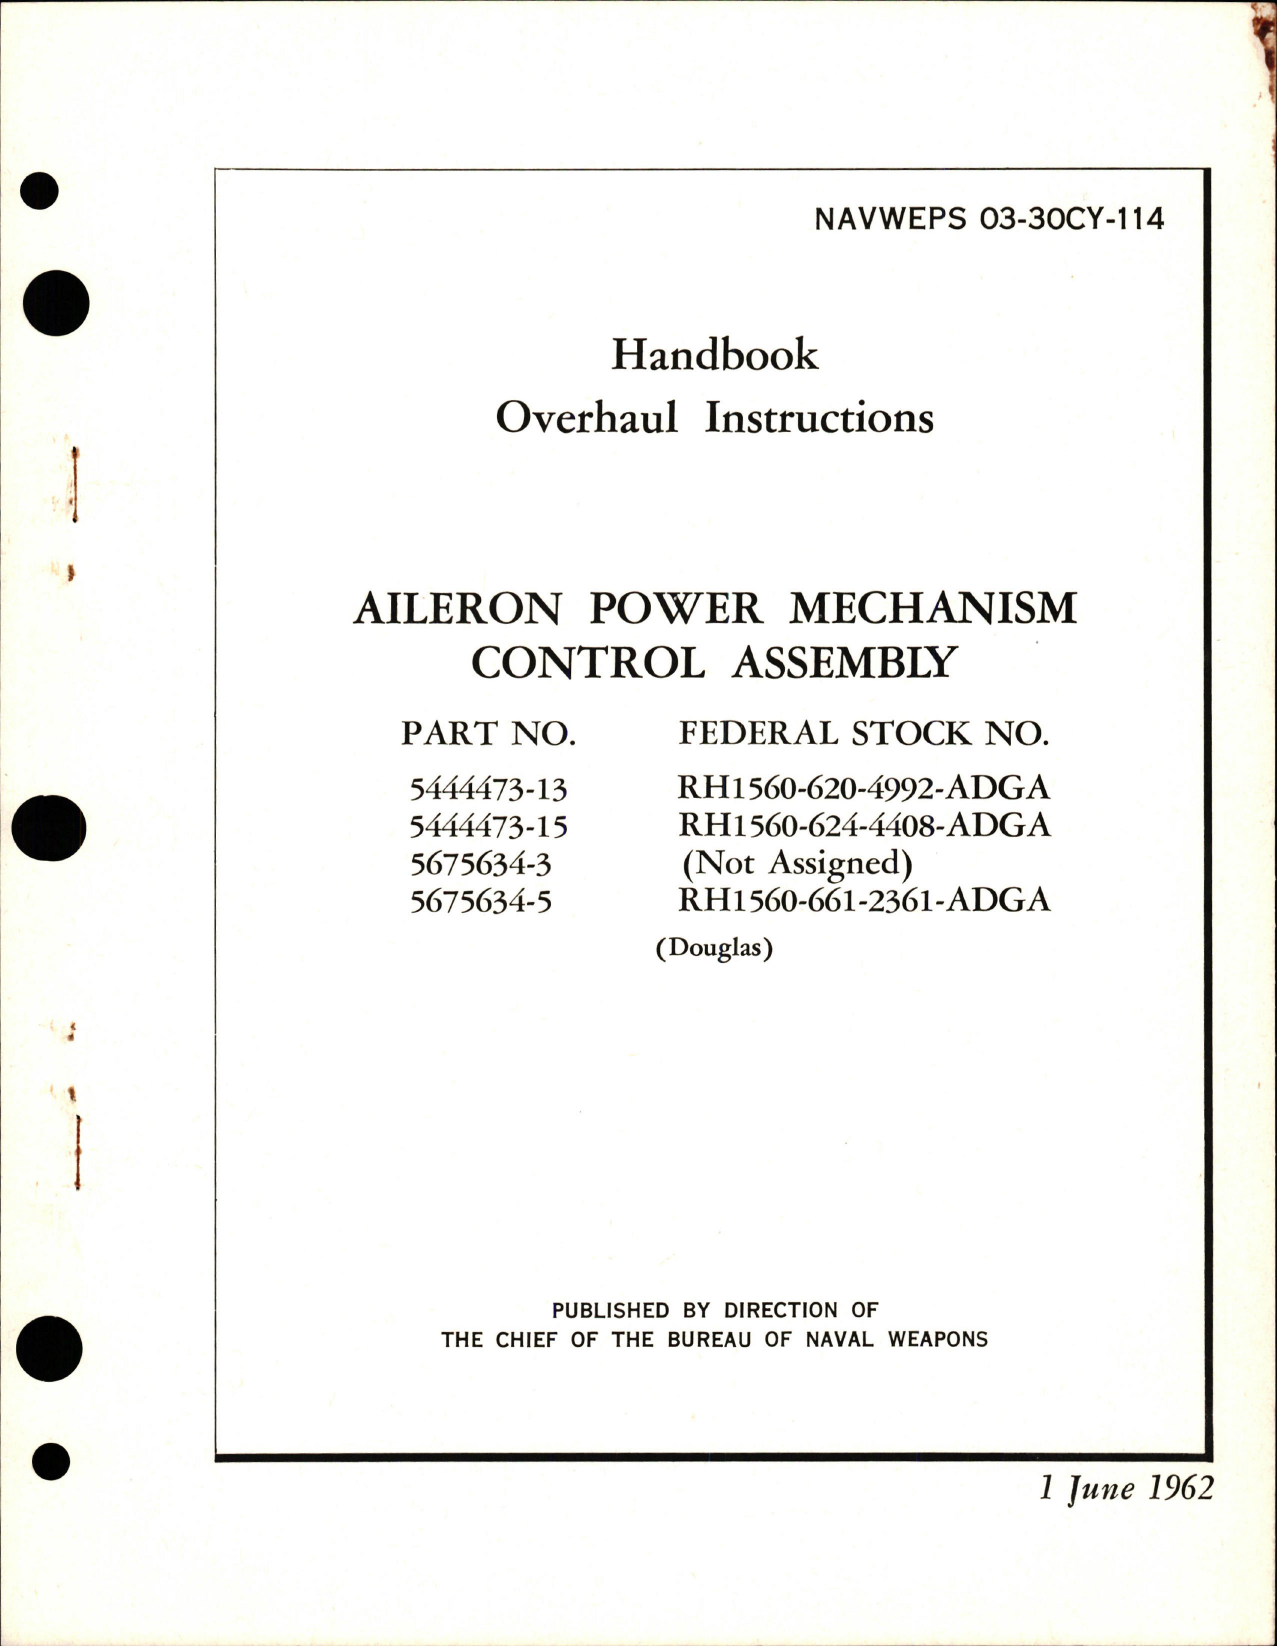 Sample page 1 from AirCorps Library document: Overhaul Instructions for Aileron Power Mechanism Control Assembly